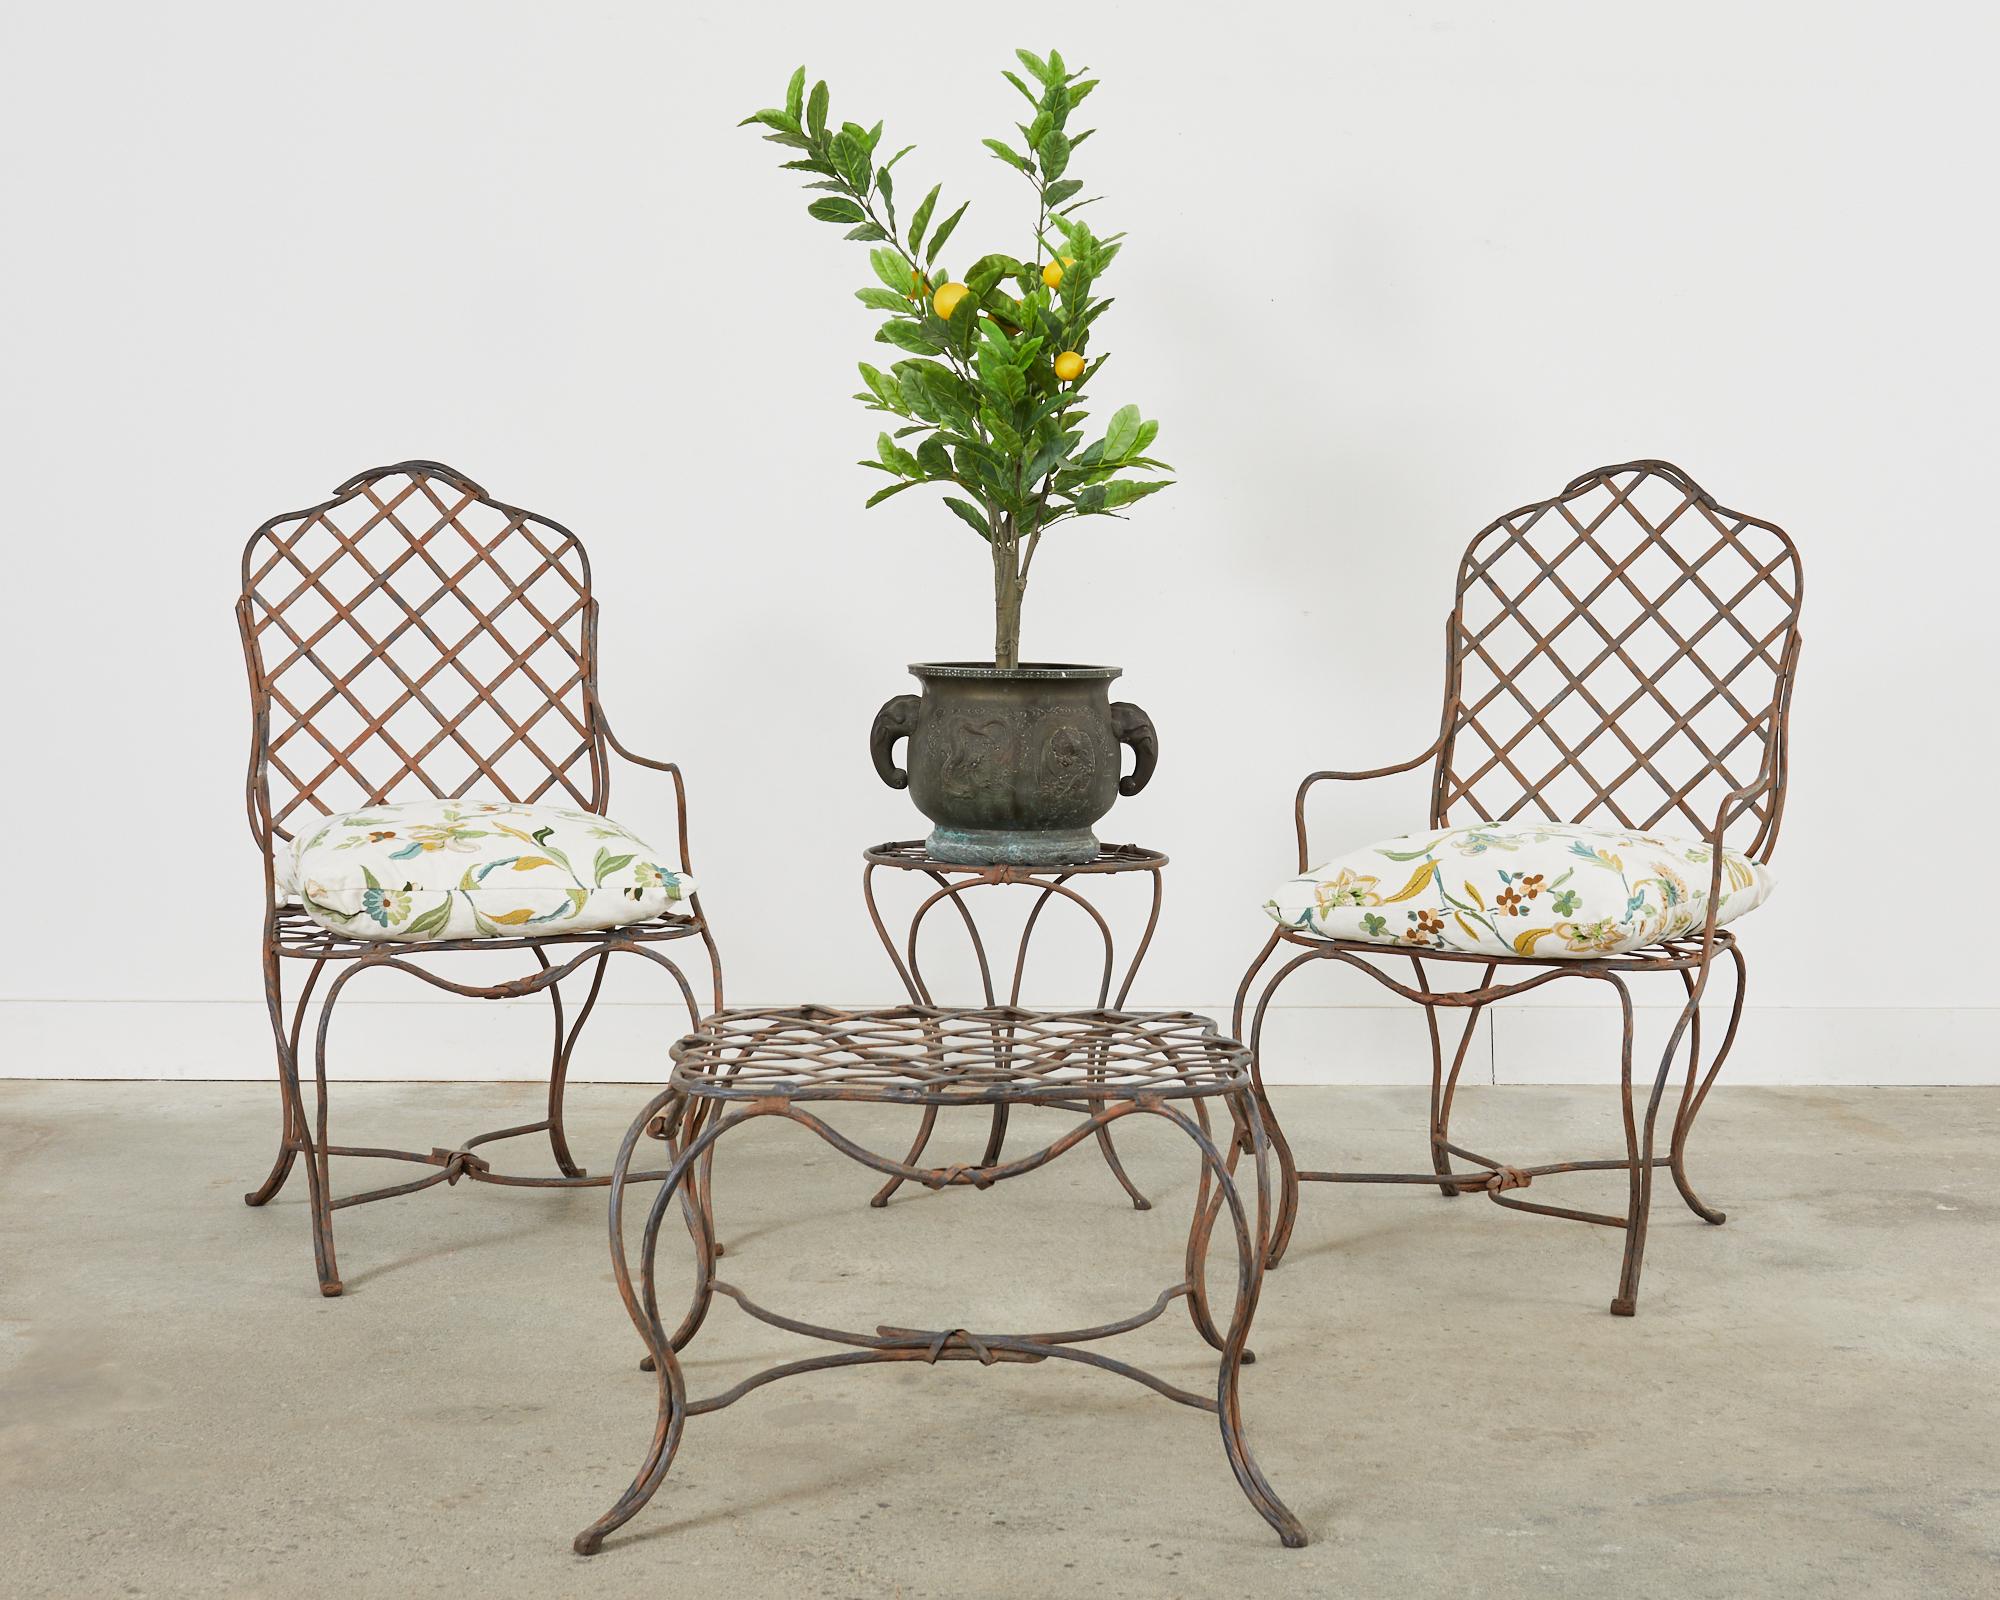 Distinctive pair of wrought iron dining armchairs with matching ottoman made in the neoclassical style and manner of Rose Tarlow or Gregorius Pineo. Hand-crafted by a foundry in Los Angeles, CA with geometric lattice inset seat and back. The thick